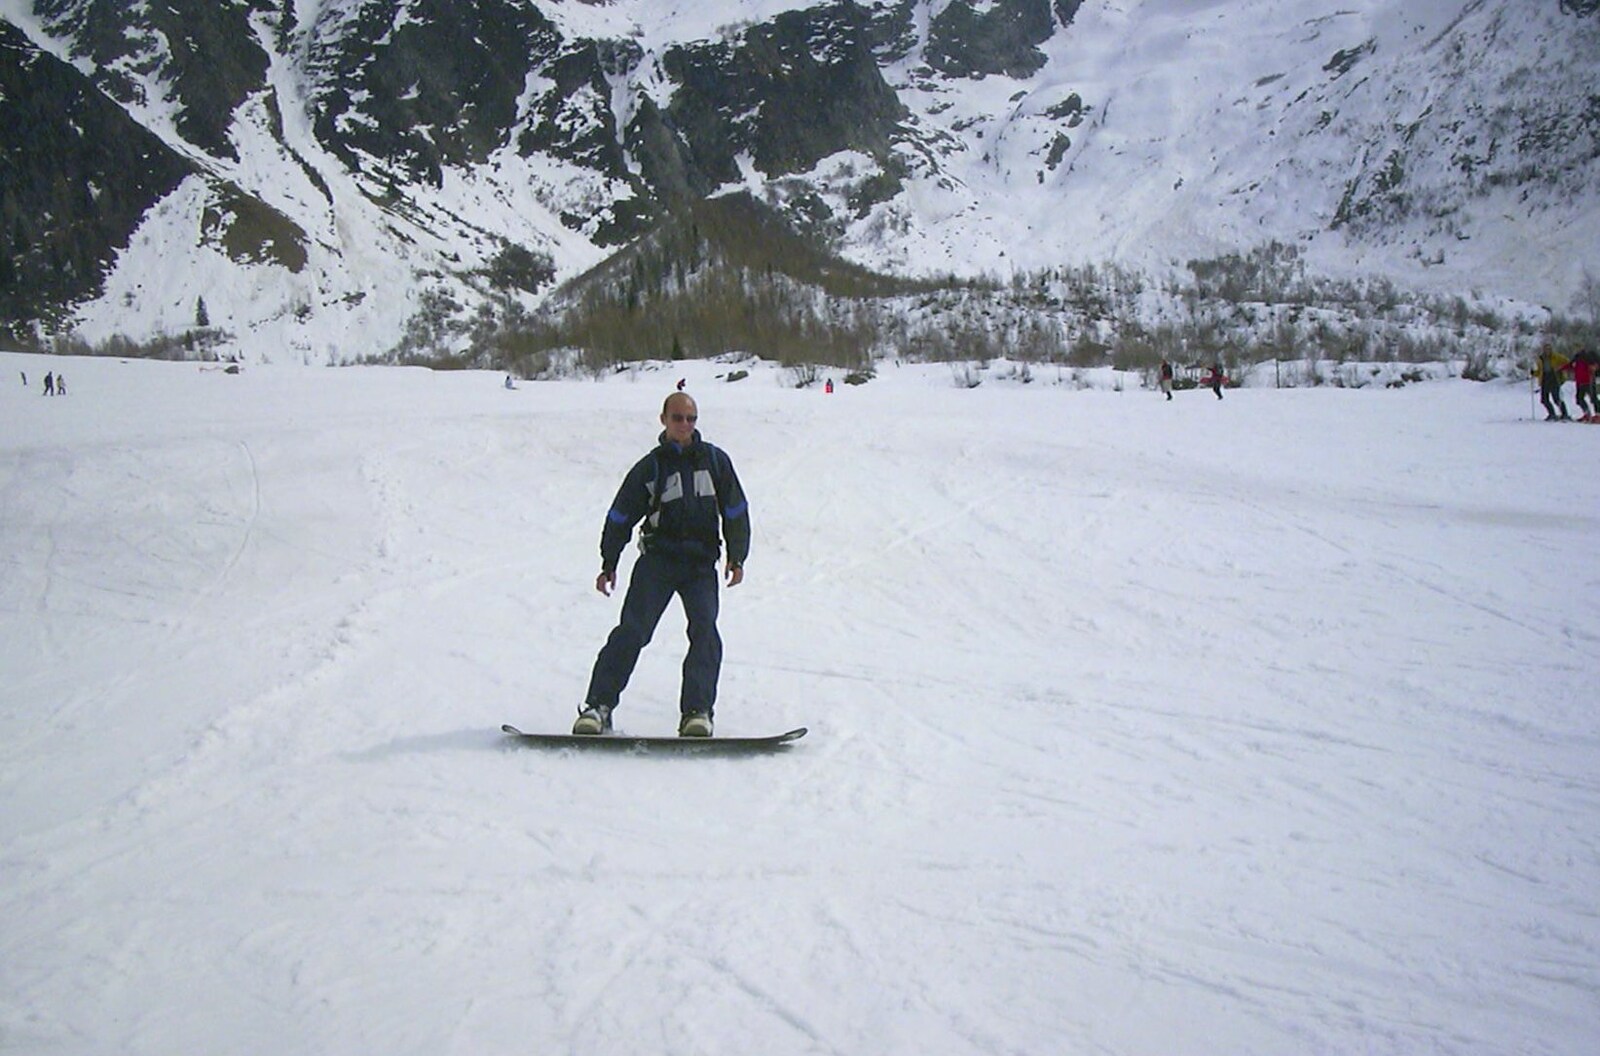 Rob snowboards from 3G Lab Goes Skiing In Chamonix, France - 12th March 2002